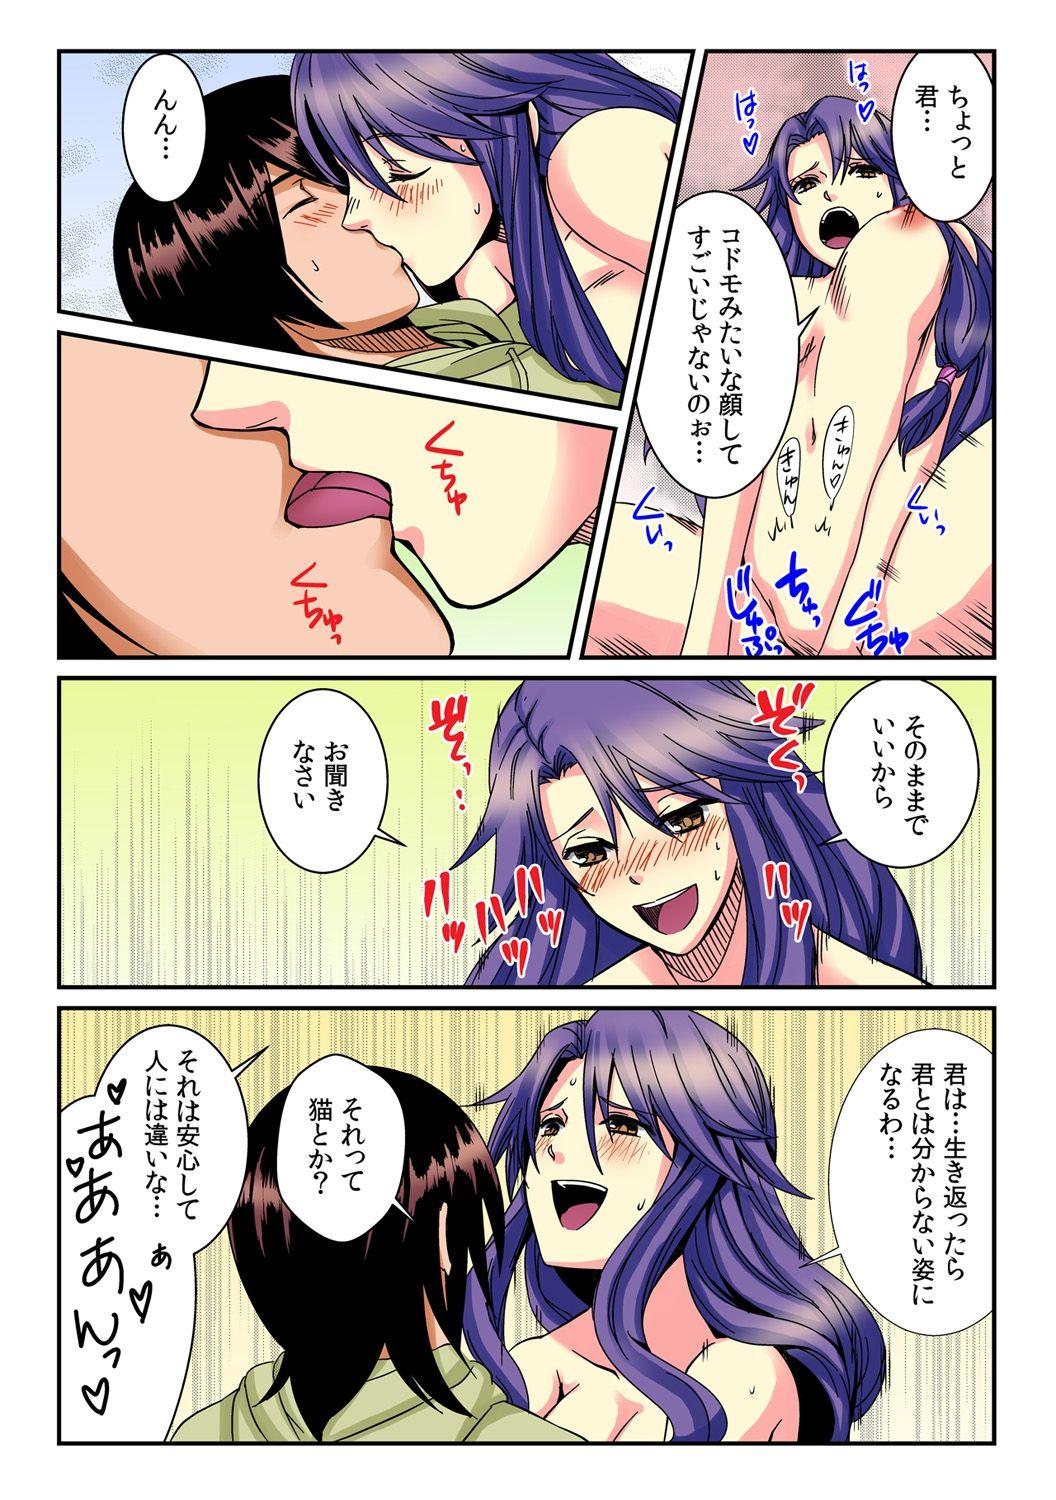 China [Akagi Gijou / Akahige] I became a girl- and I definitely can't let anyone find out! (Full color) 1 Funk - Page 10